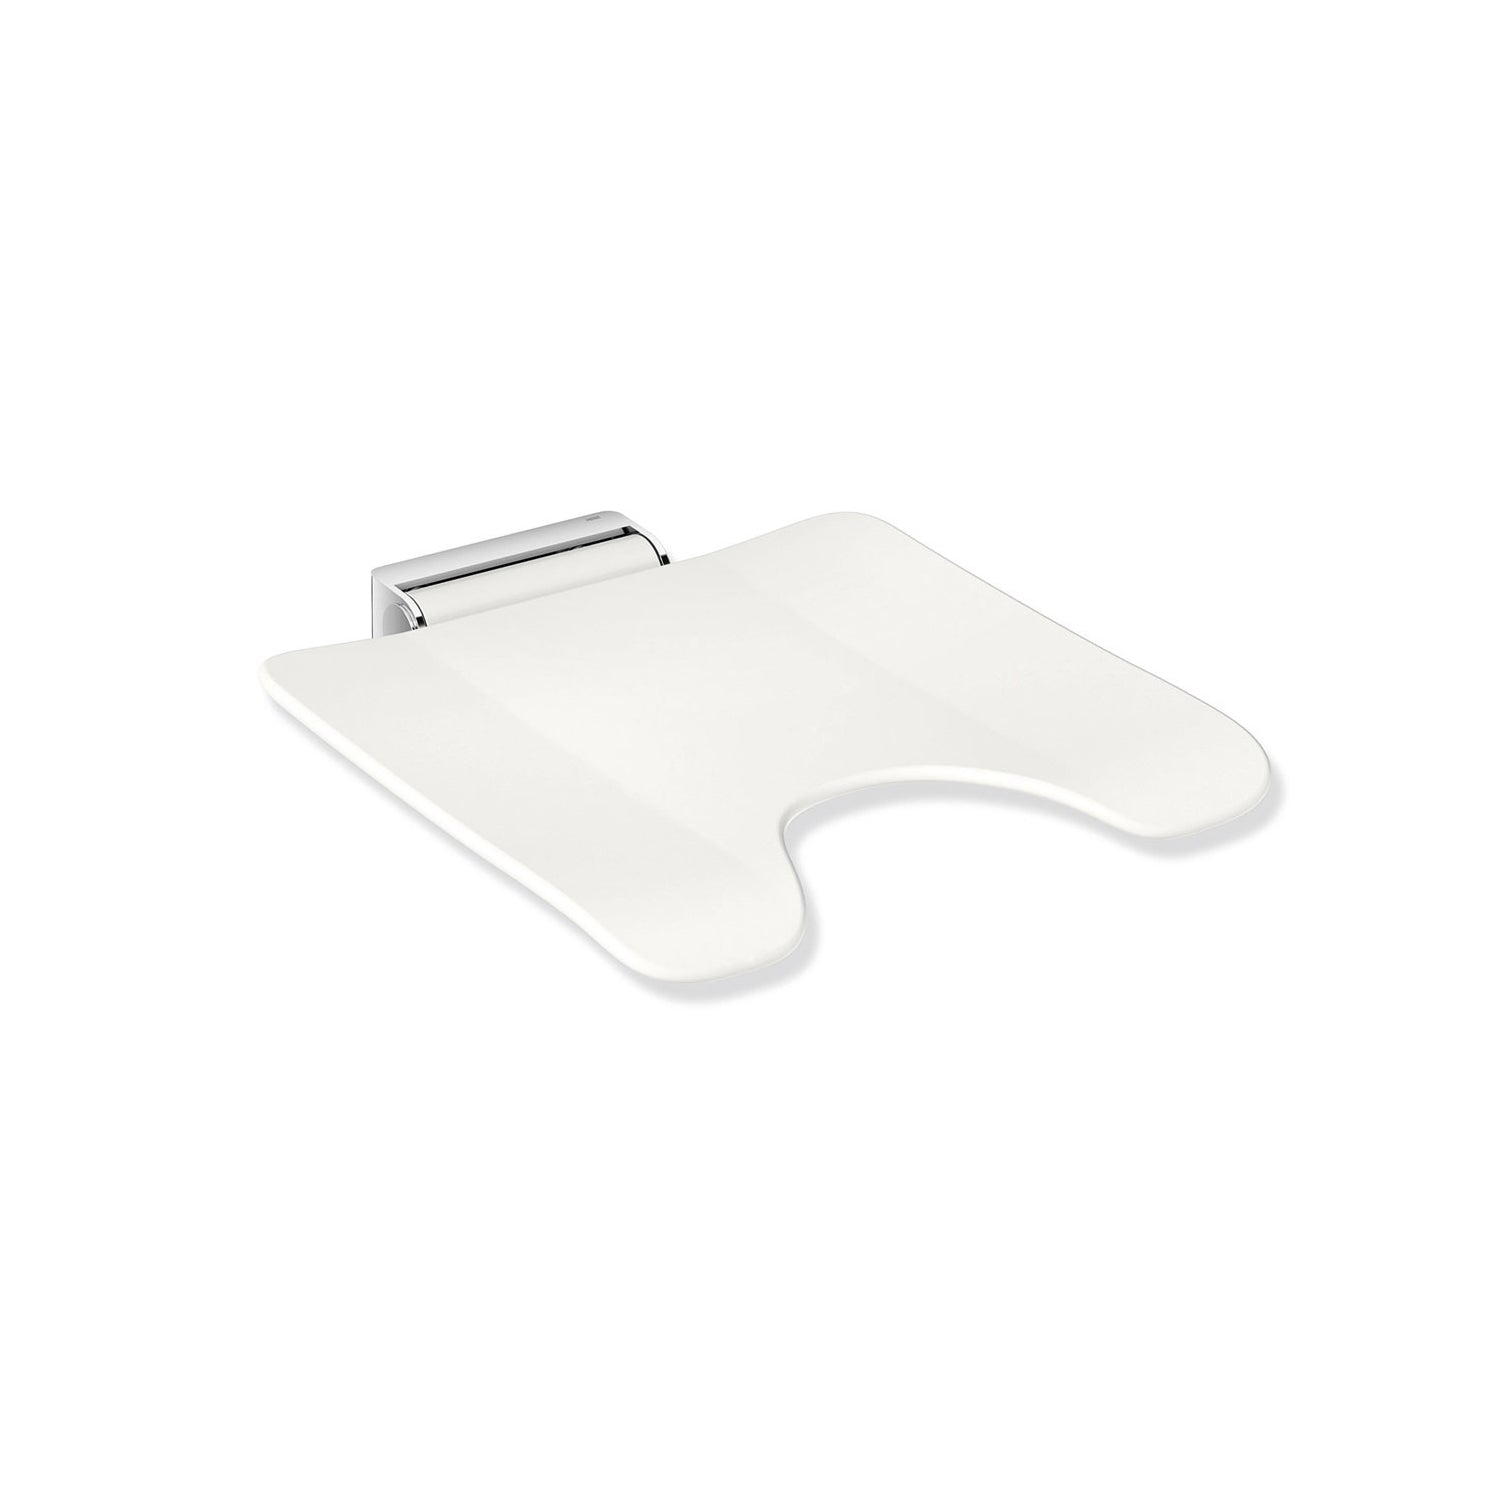 Freestyle Fixed Shower Seat with a cut-out in a white seat and chrome finish bracket on a white background